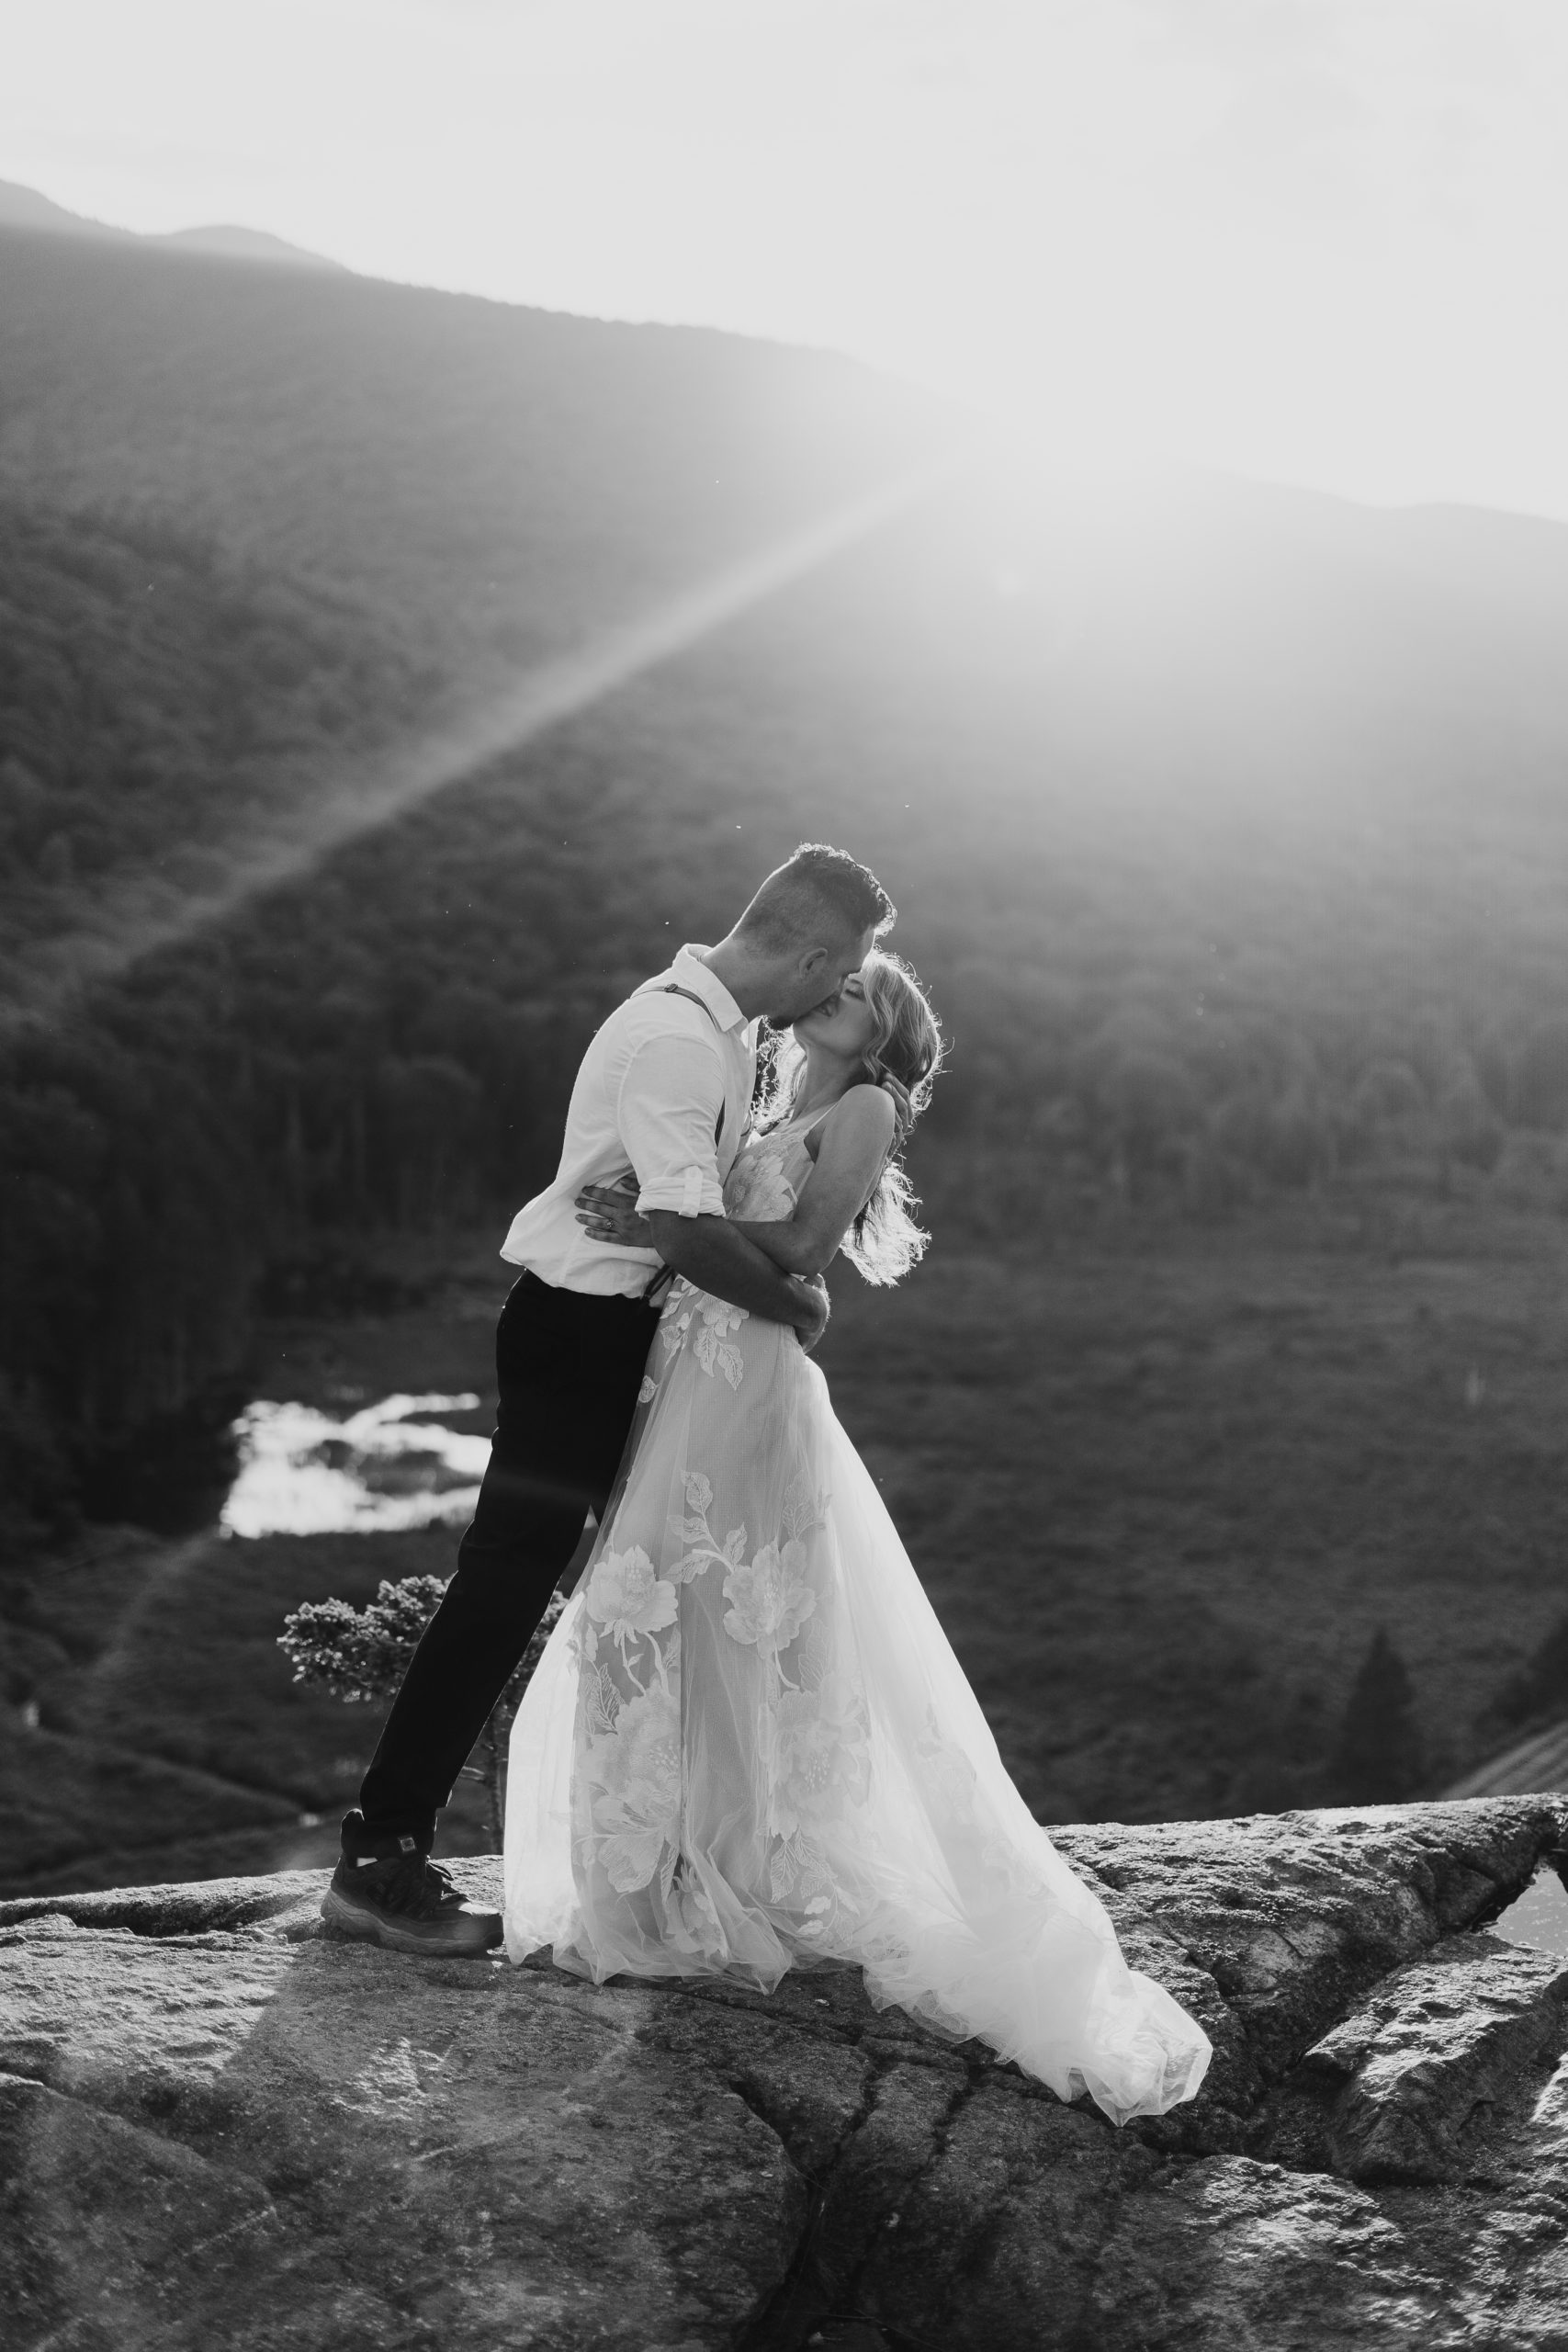 Elopement Ceremony in the White Mountains of NH